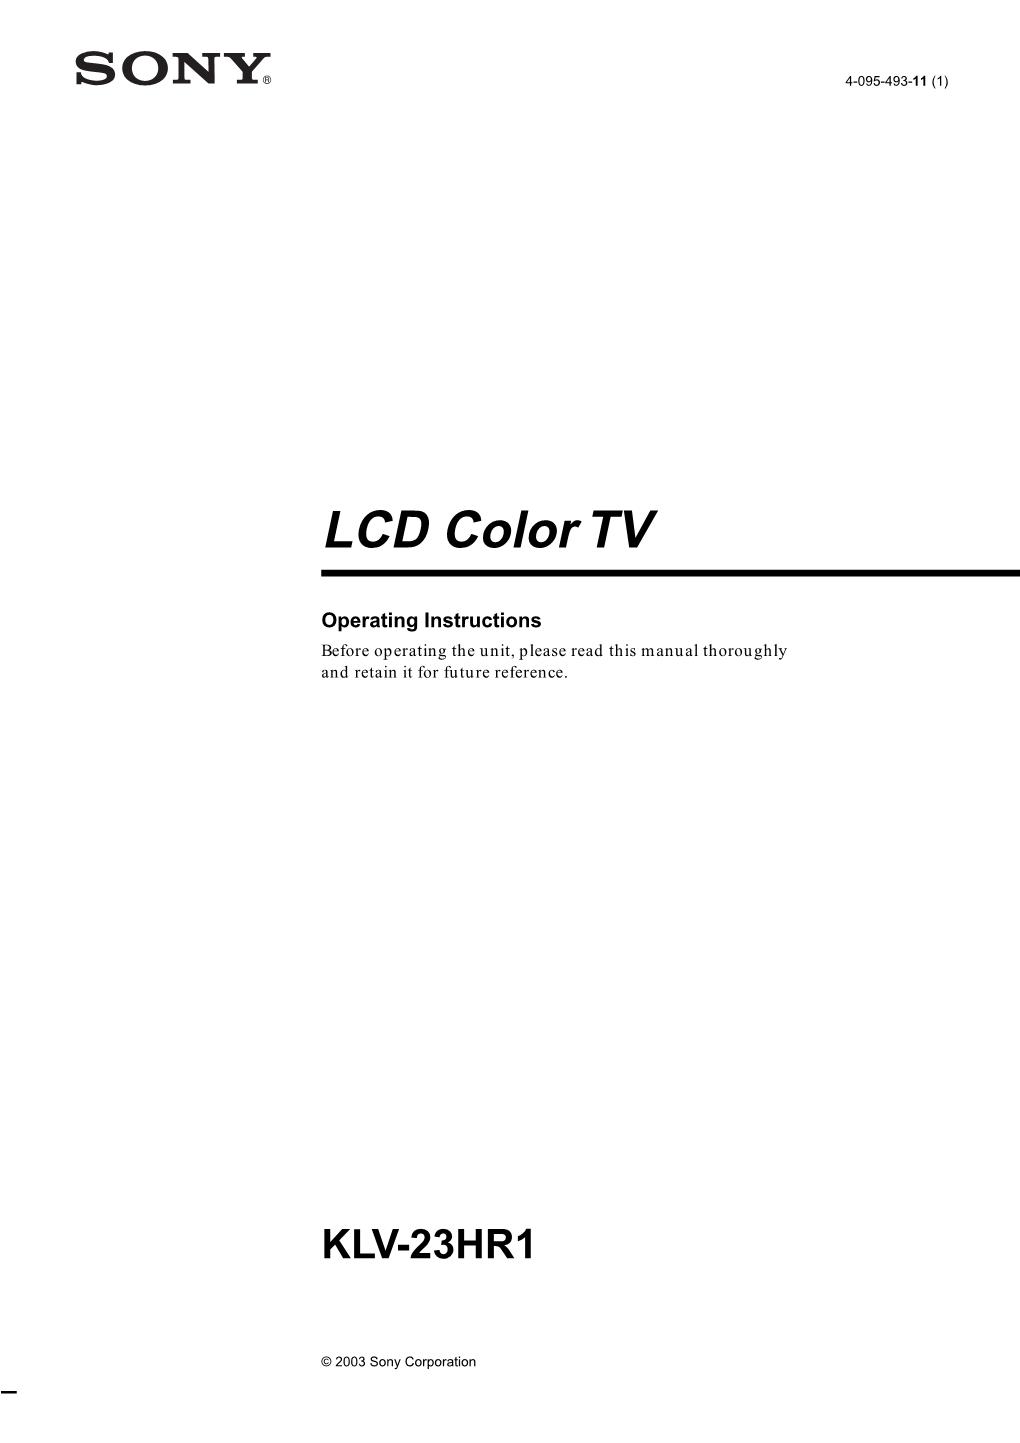 LCD Color TV